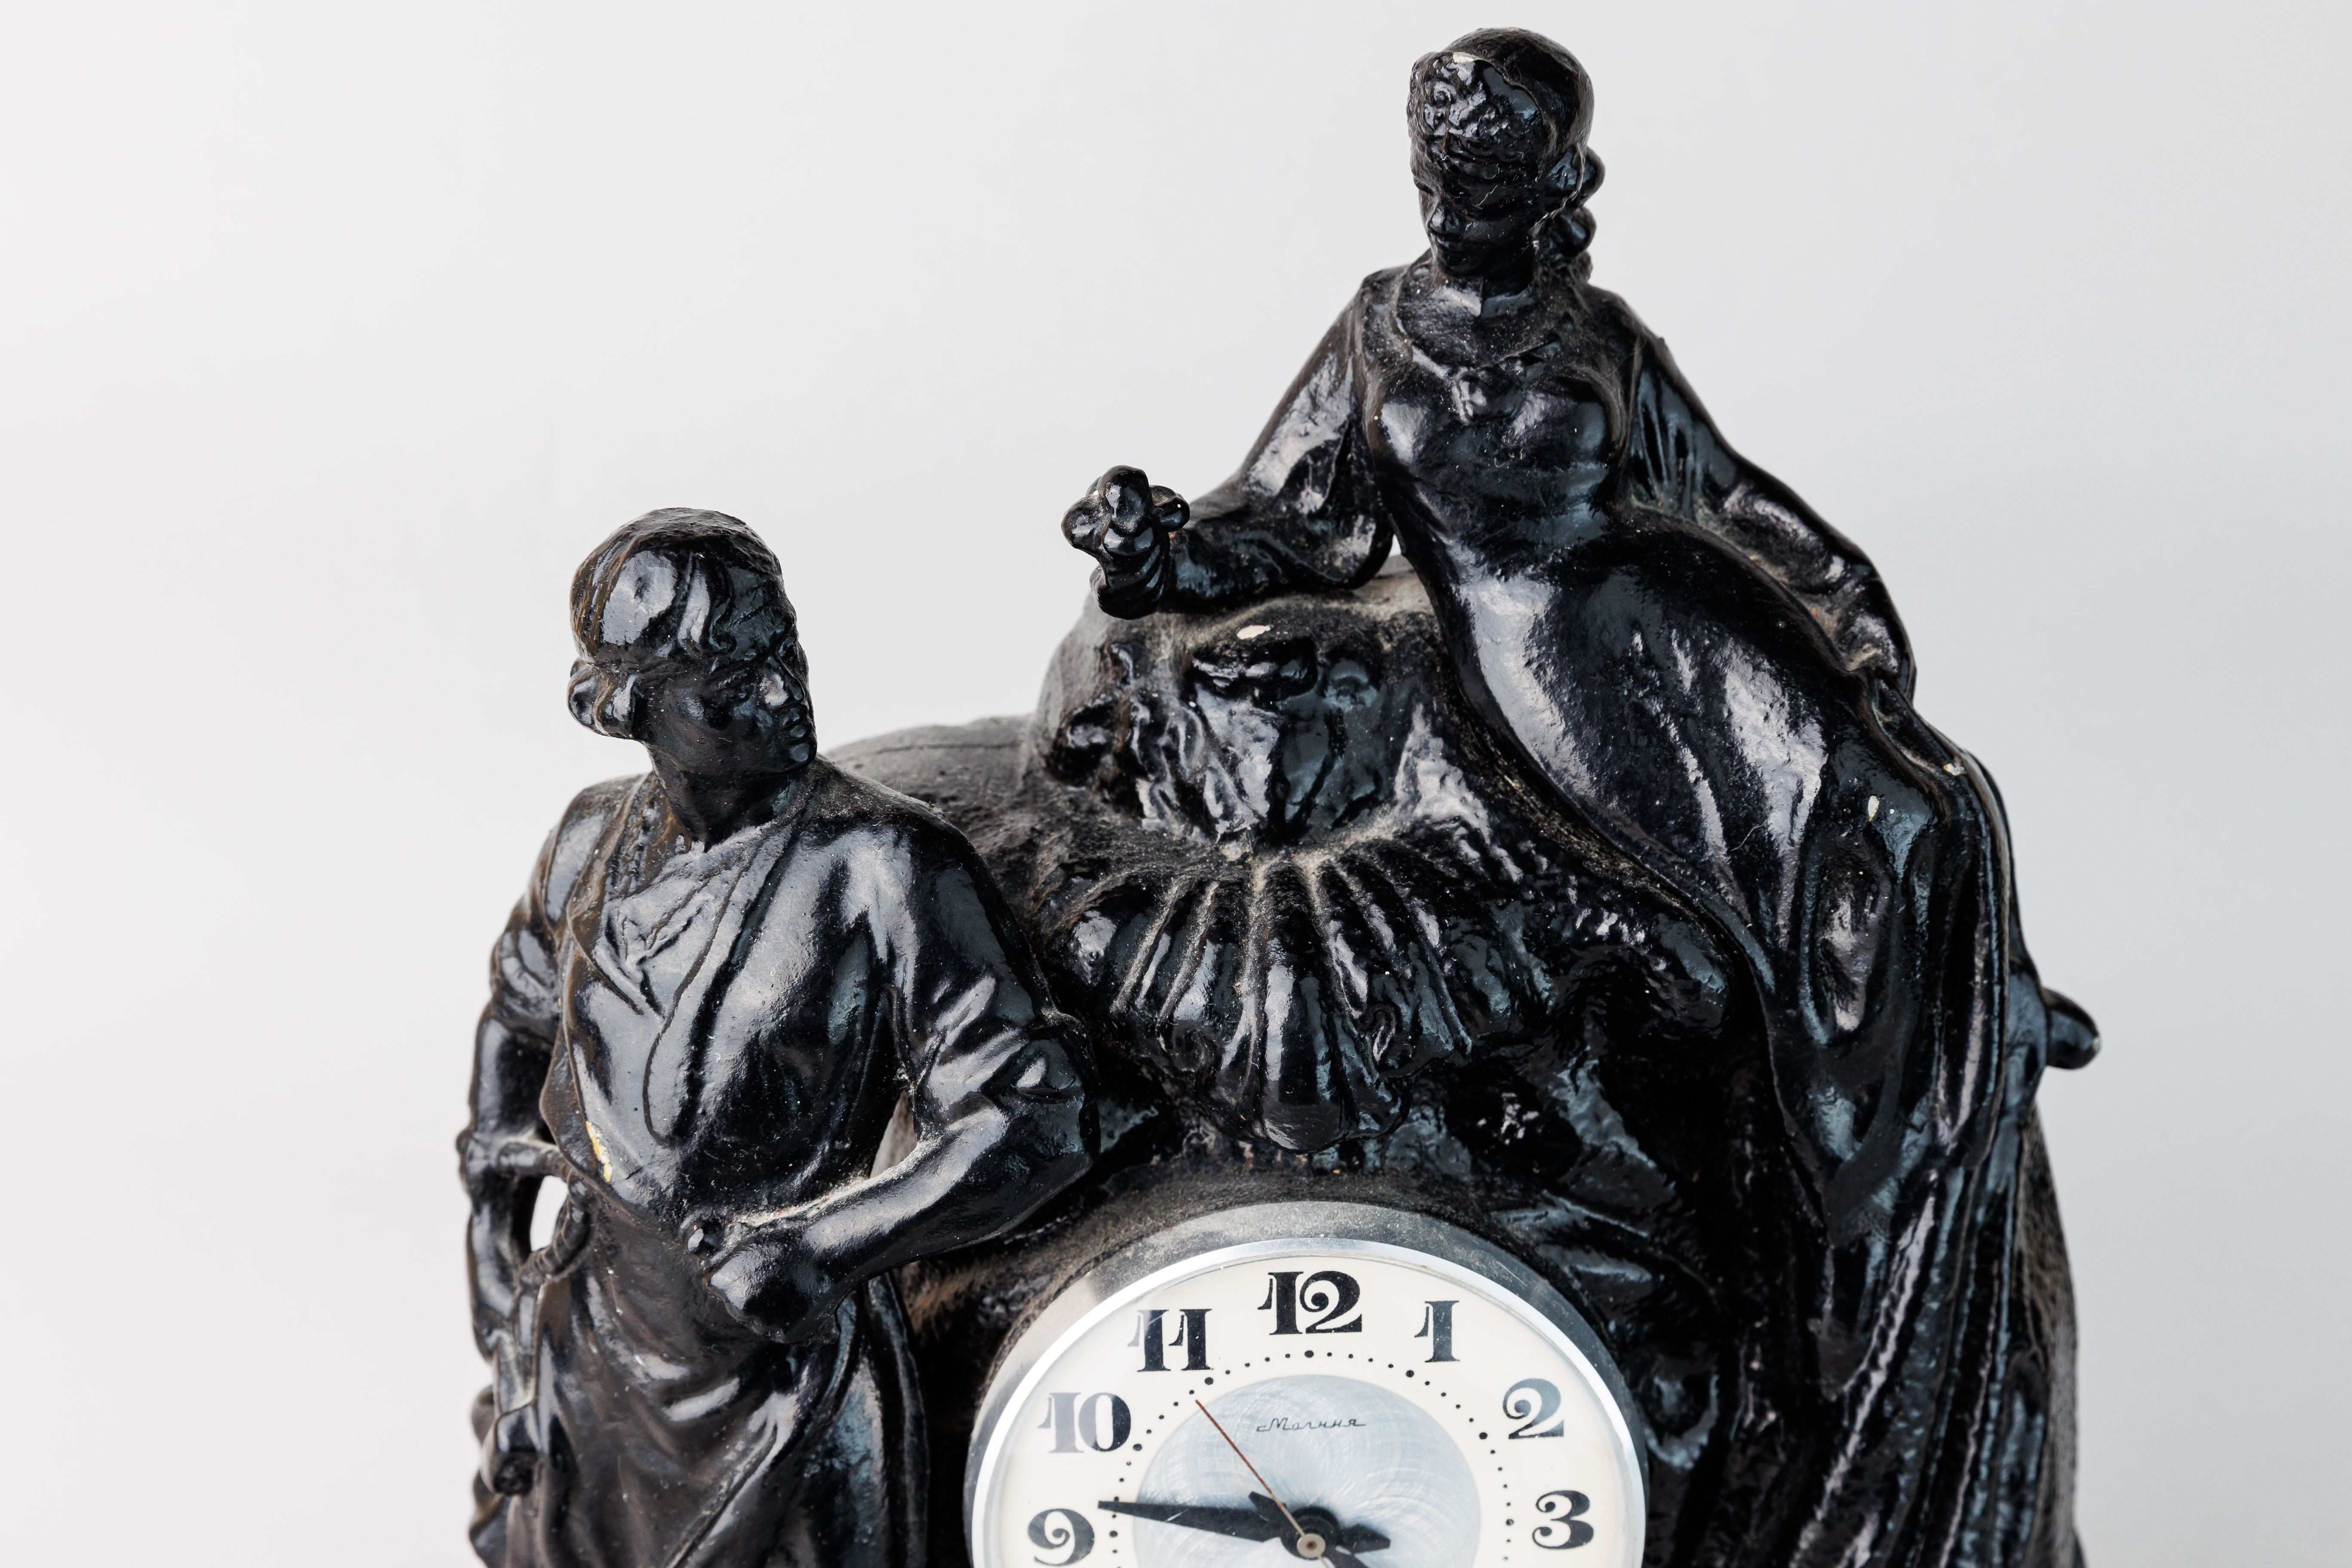 Mechanical Table Clock "Mistress of Copper Mountain and Danila Master" - Image 9 of 9